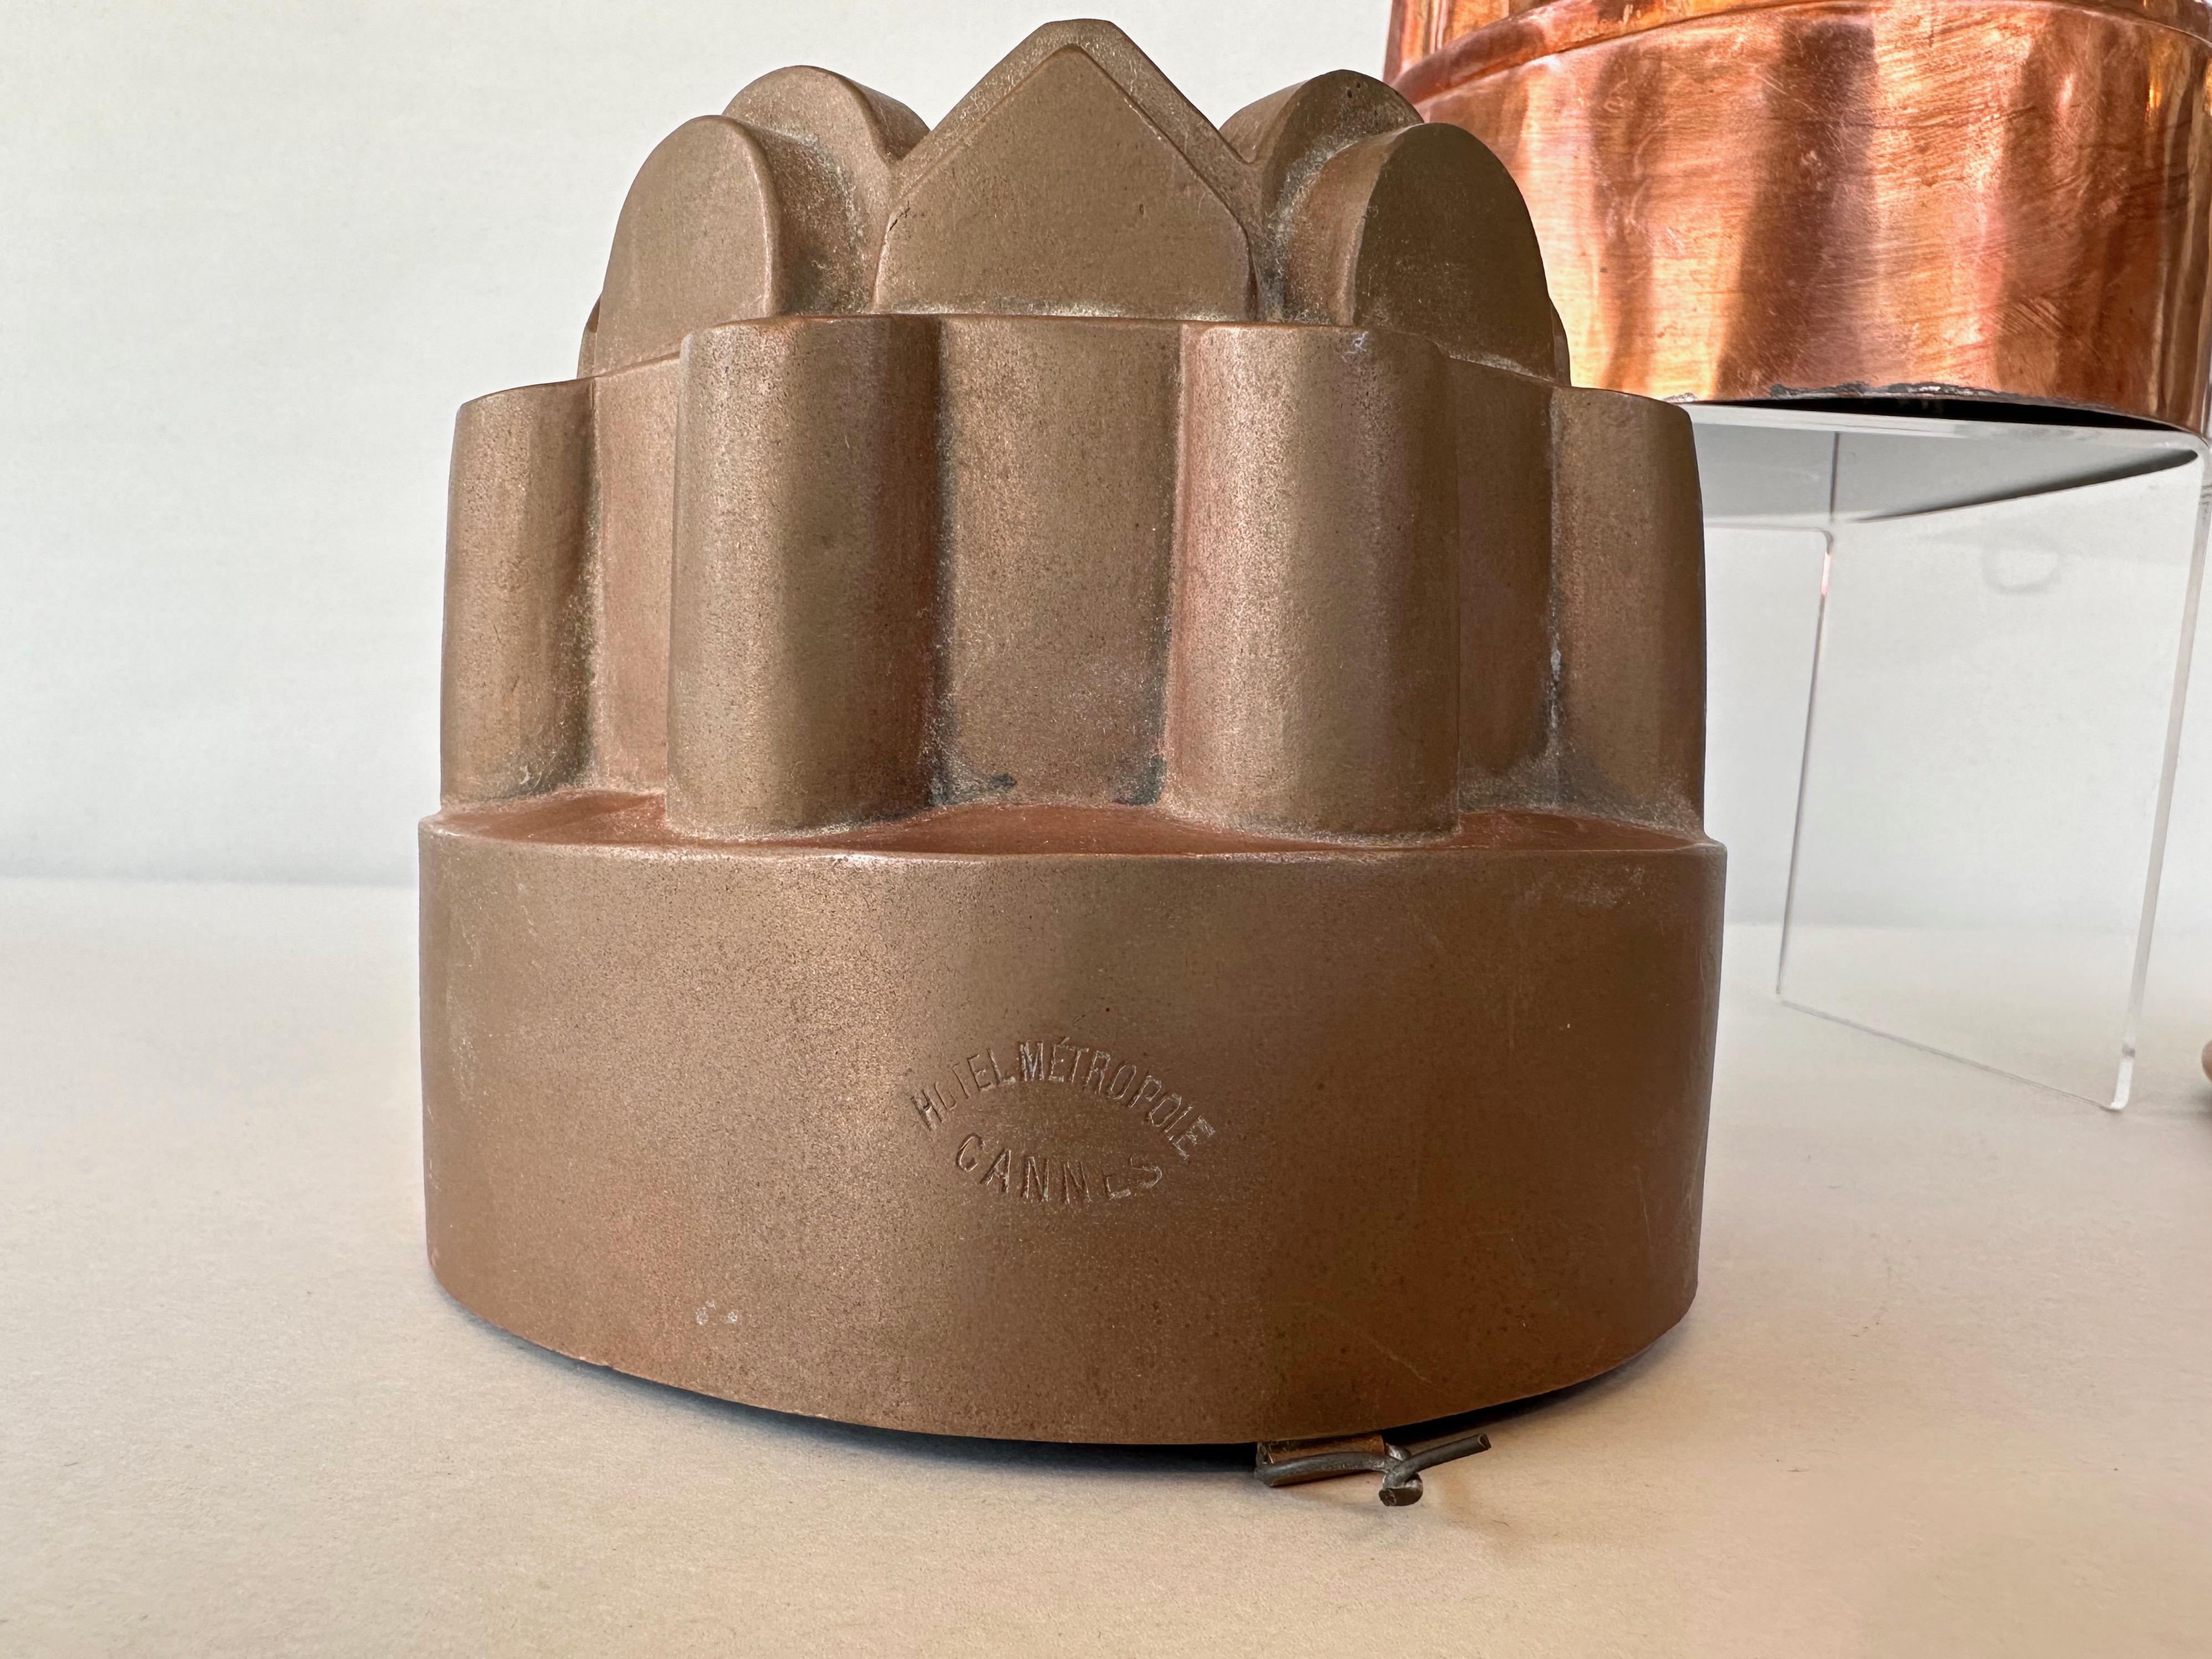 Trio of Antique French and Dutch Copper Cake Molds or Jelly Molds, c. 1910 For Sale 1